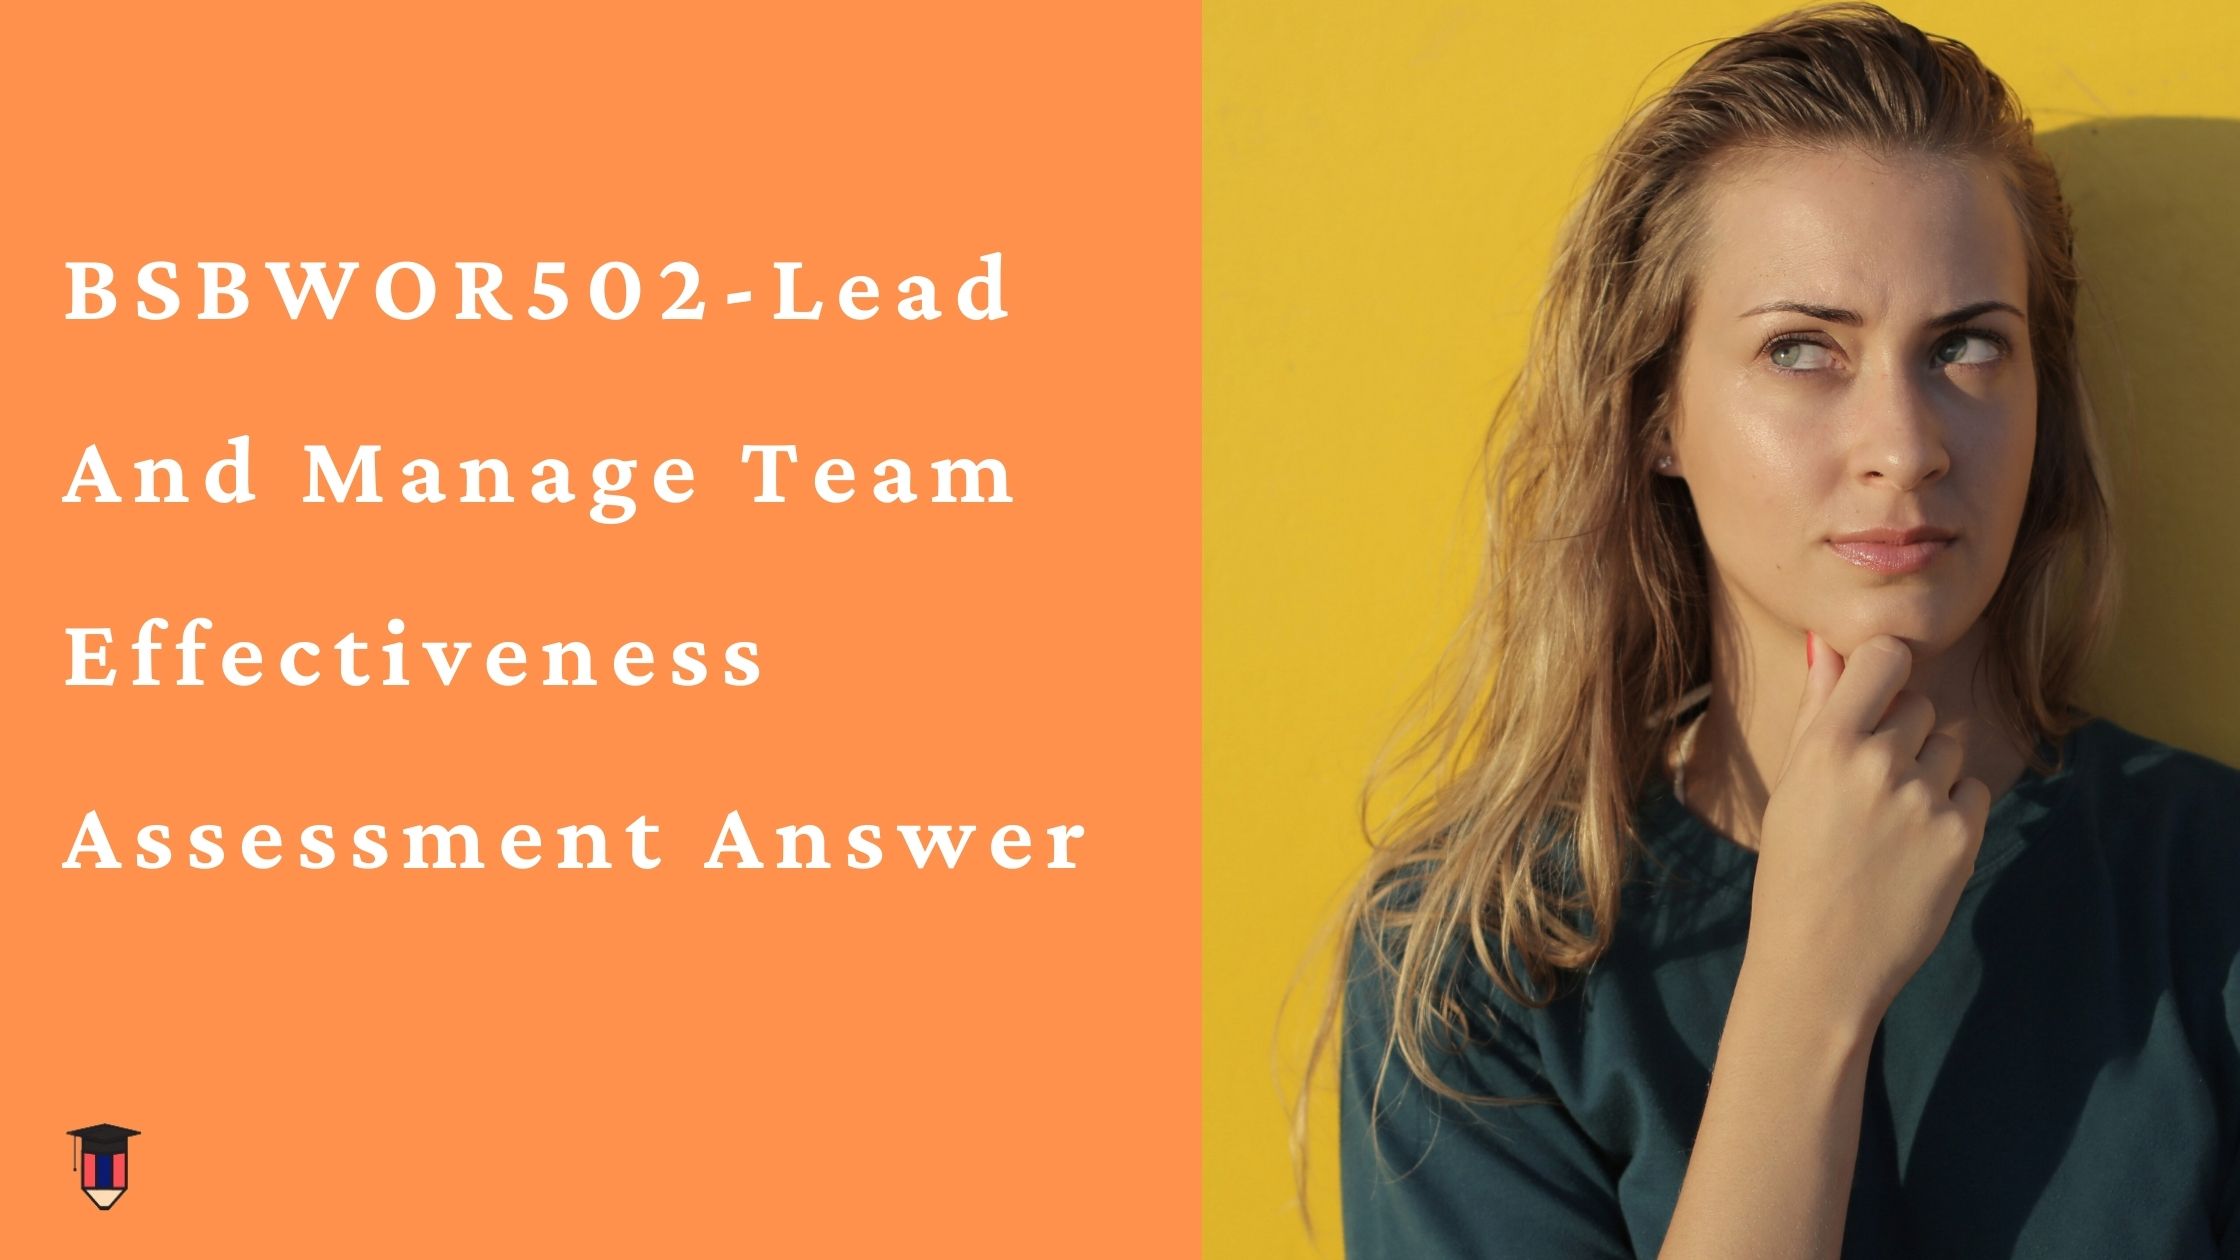 BSBWOR502-Lead And Manage Team Effectiveness Assessment Answer